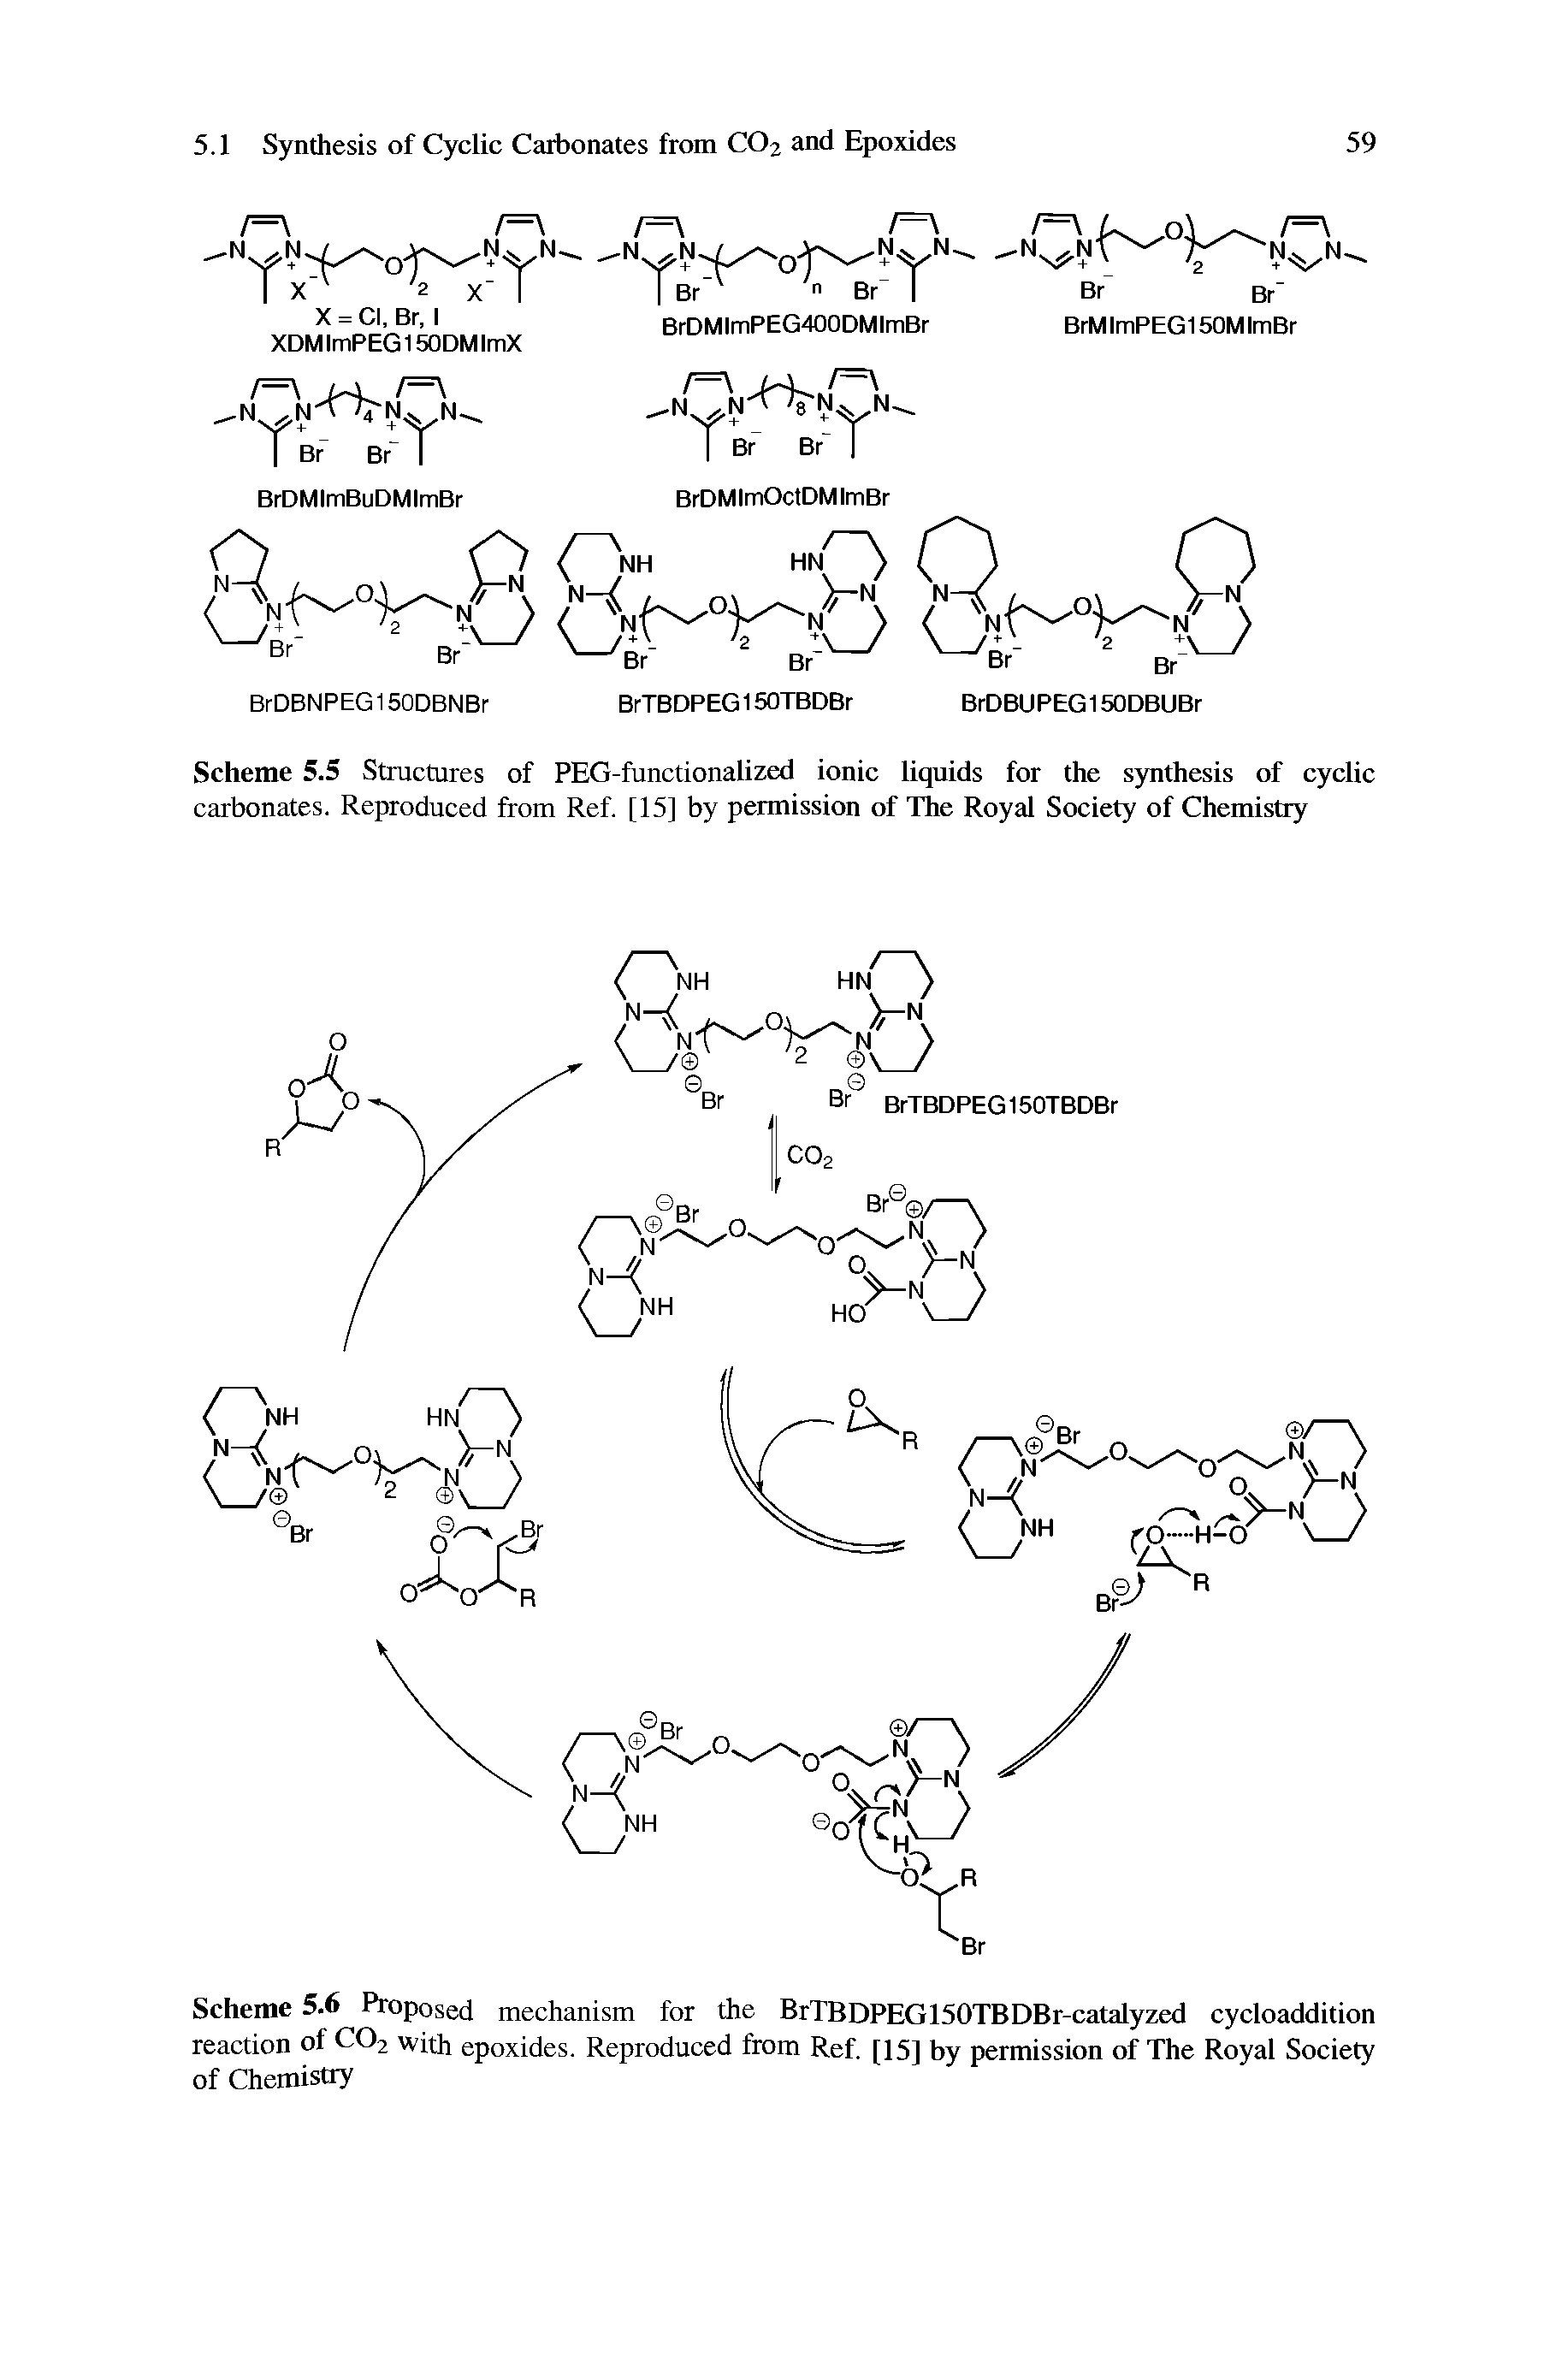 Scheme 5.6 Proposed mechanism for the BrTBDPEG150TBDBr-catalyzed cycloaddition reaction of C02 with epoxides. Reproduced from Ref. [15] by permission of The Royal Society of Chemistry...